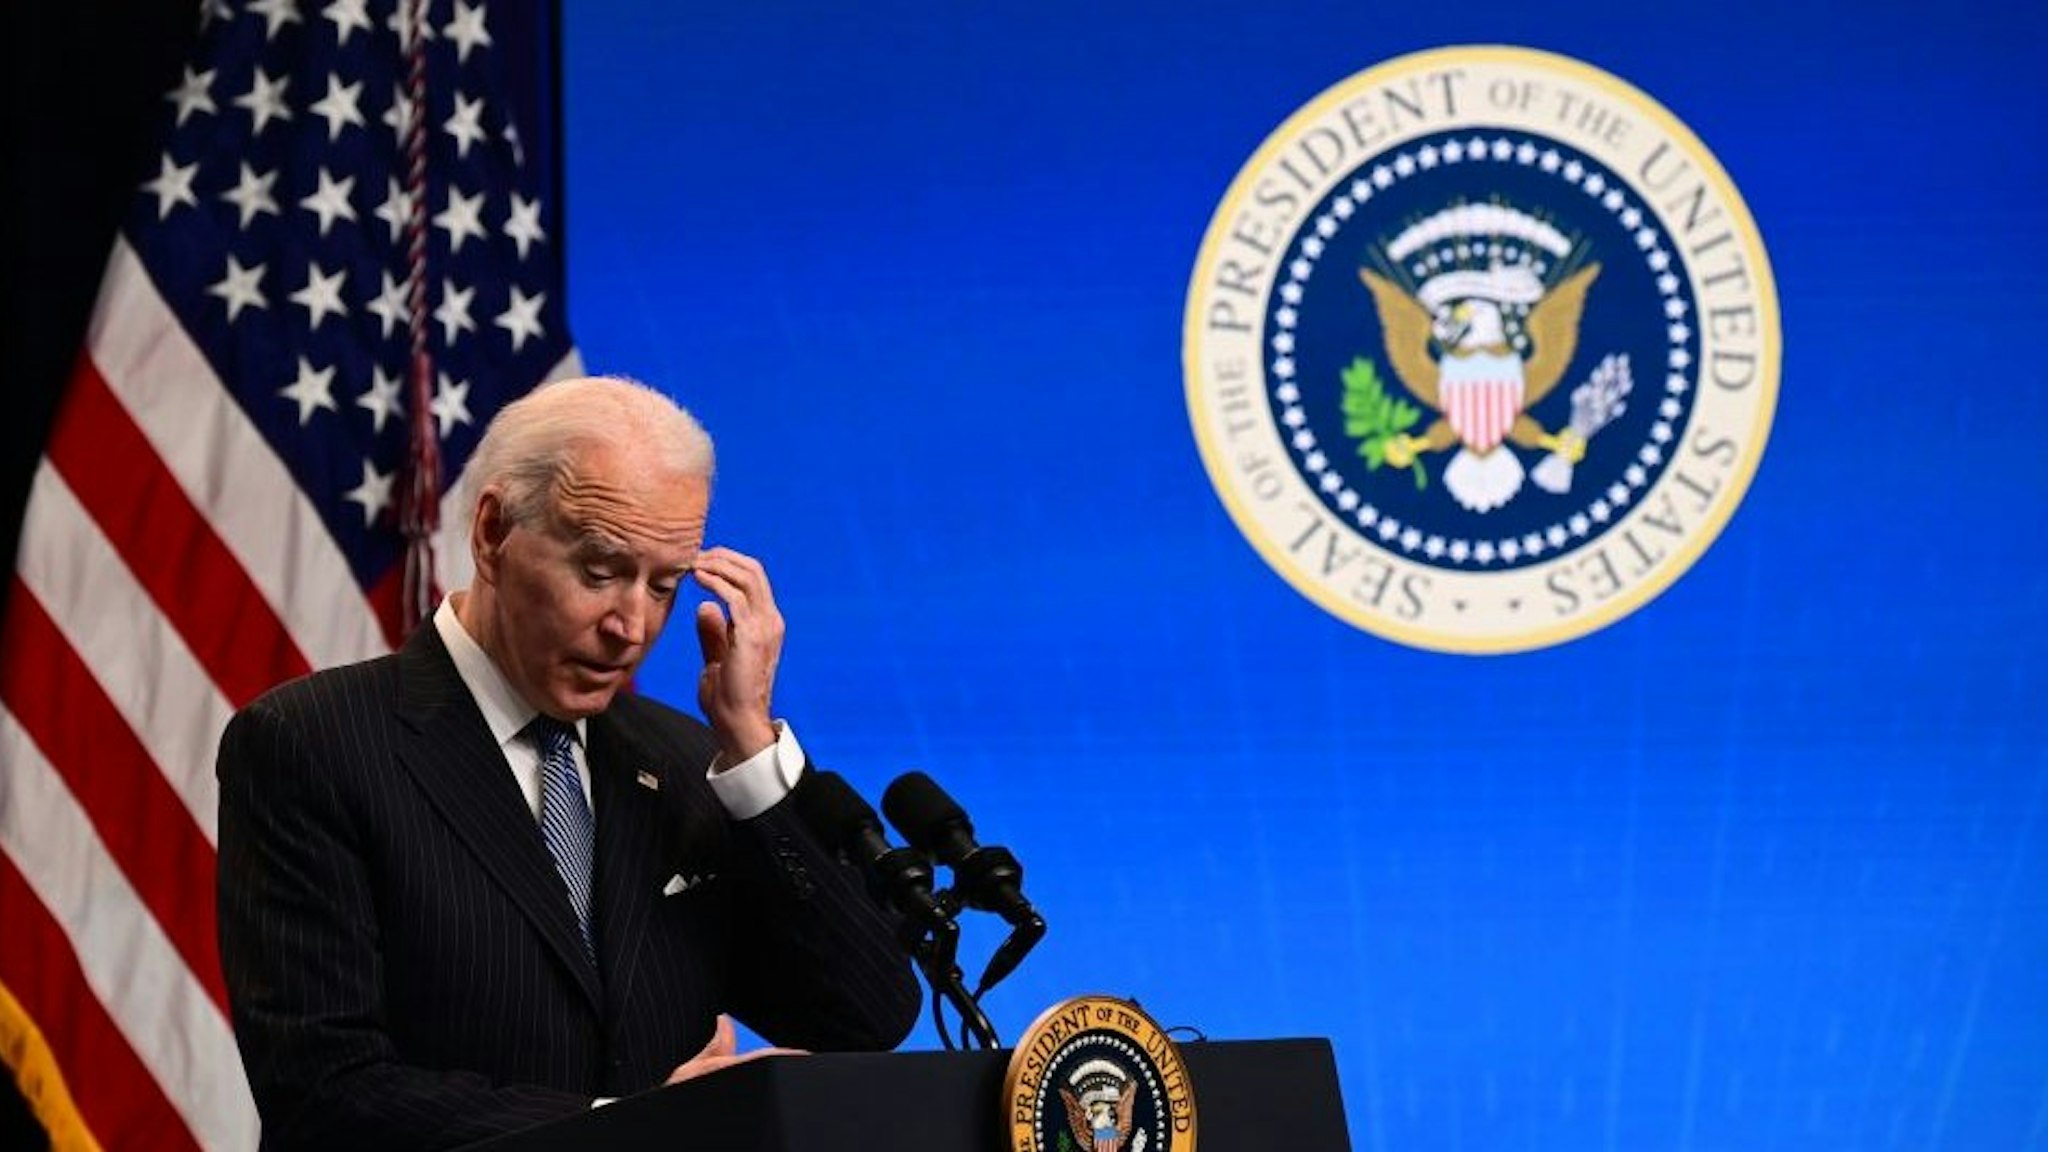 US President Joe Biden answers questions from the media after signing a "Made in America" Executive Order in the South Court Auditorium at the White House on January 25, 2021 in Washington, DC. (Photo by JIM WATSON / AFP) (Photo by